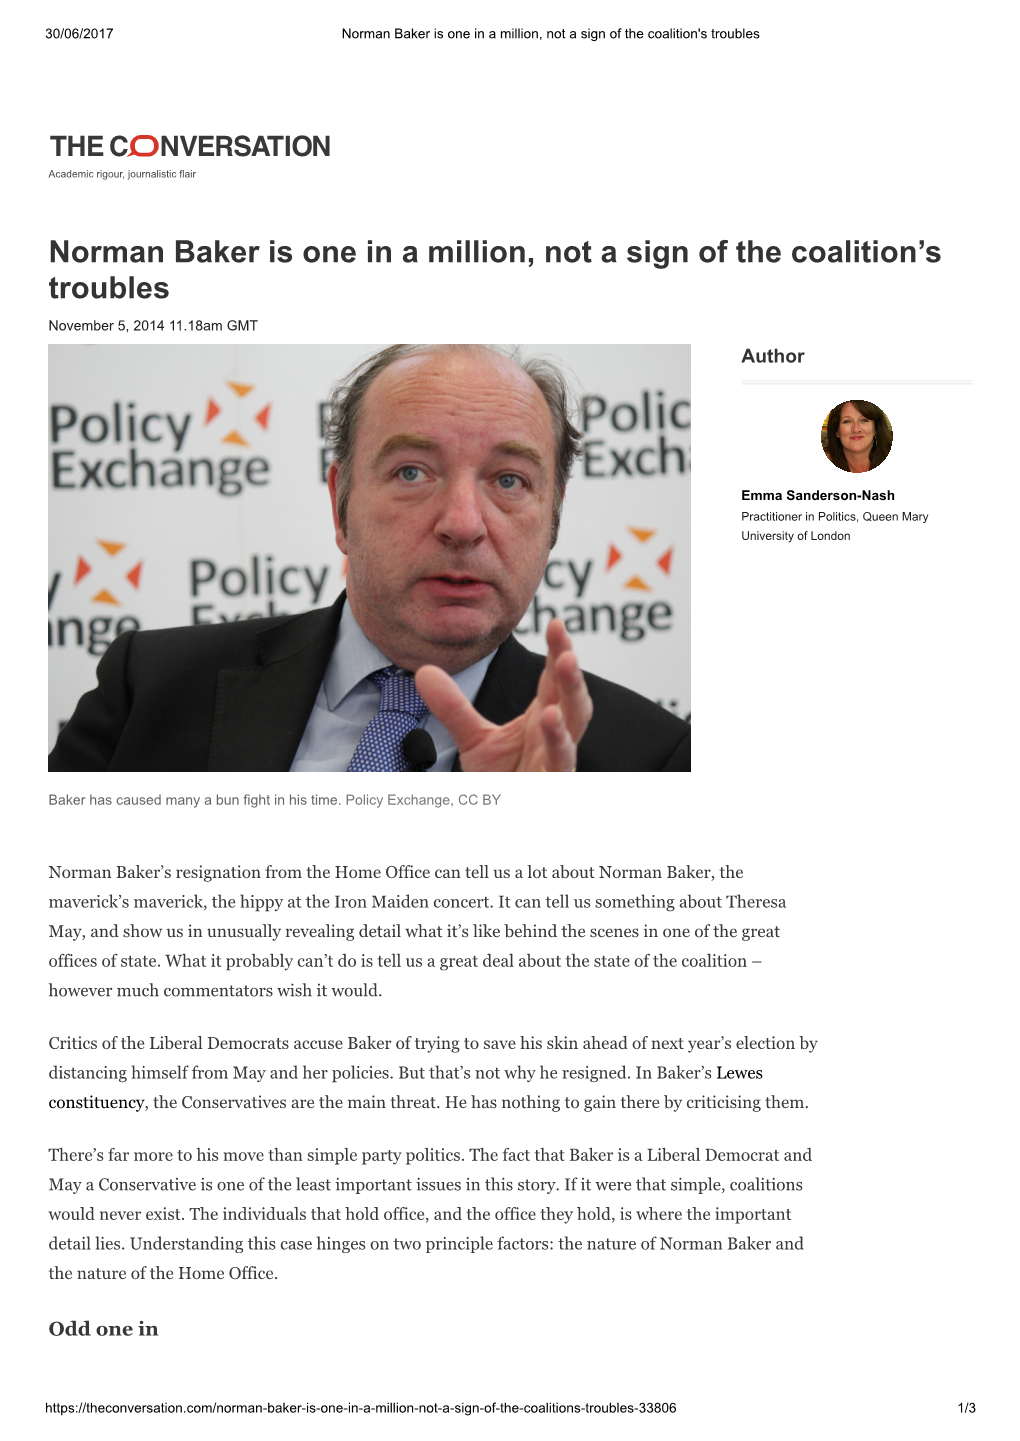 Norman Baker Is One in a Million, Not a Sign of the Coalition's Troubles